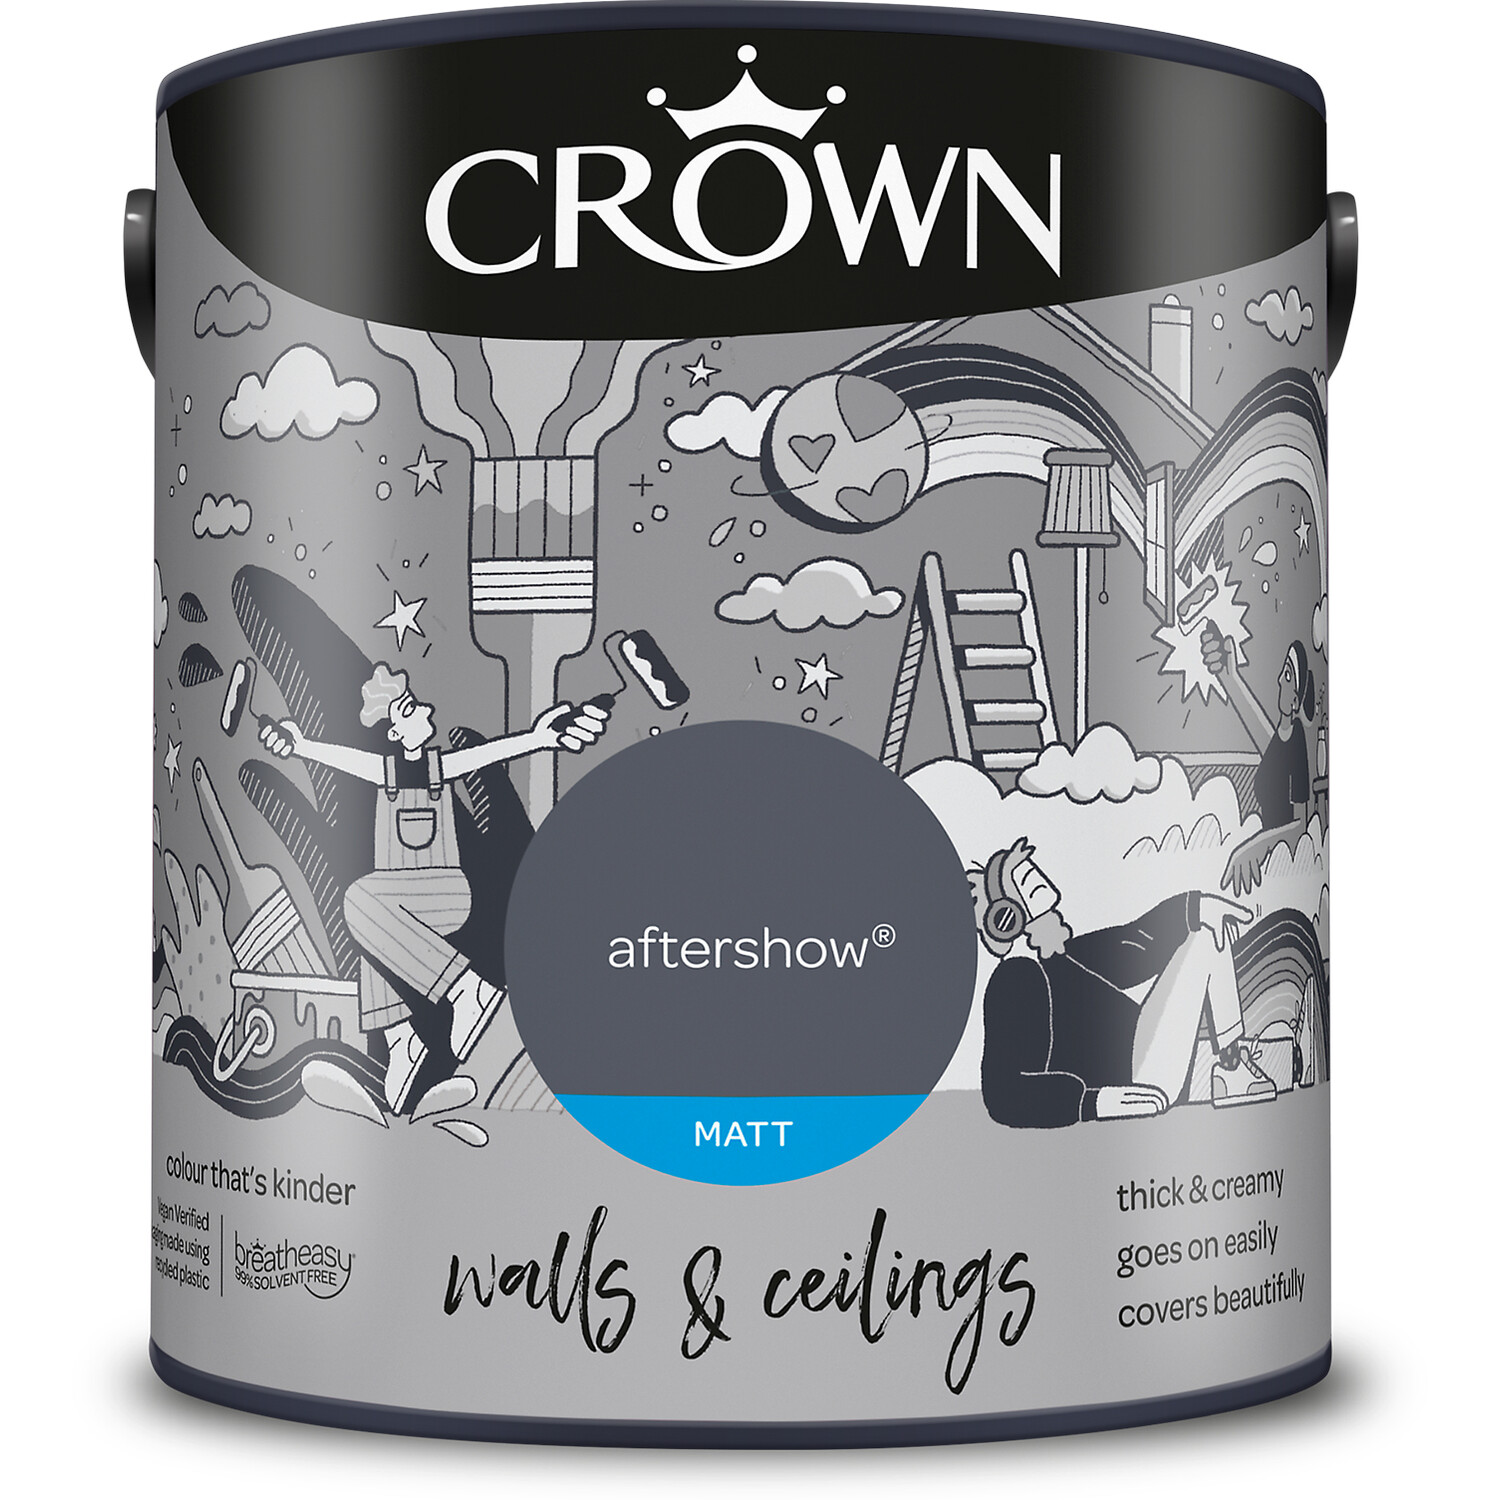 Crown Wall and Ceilings Aftershow Matt Emulsion 2.5L Image 2